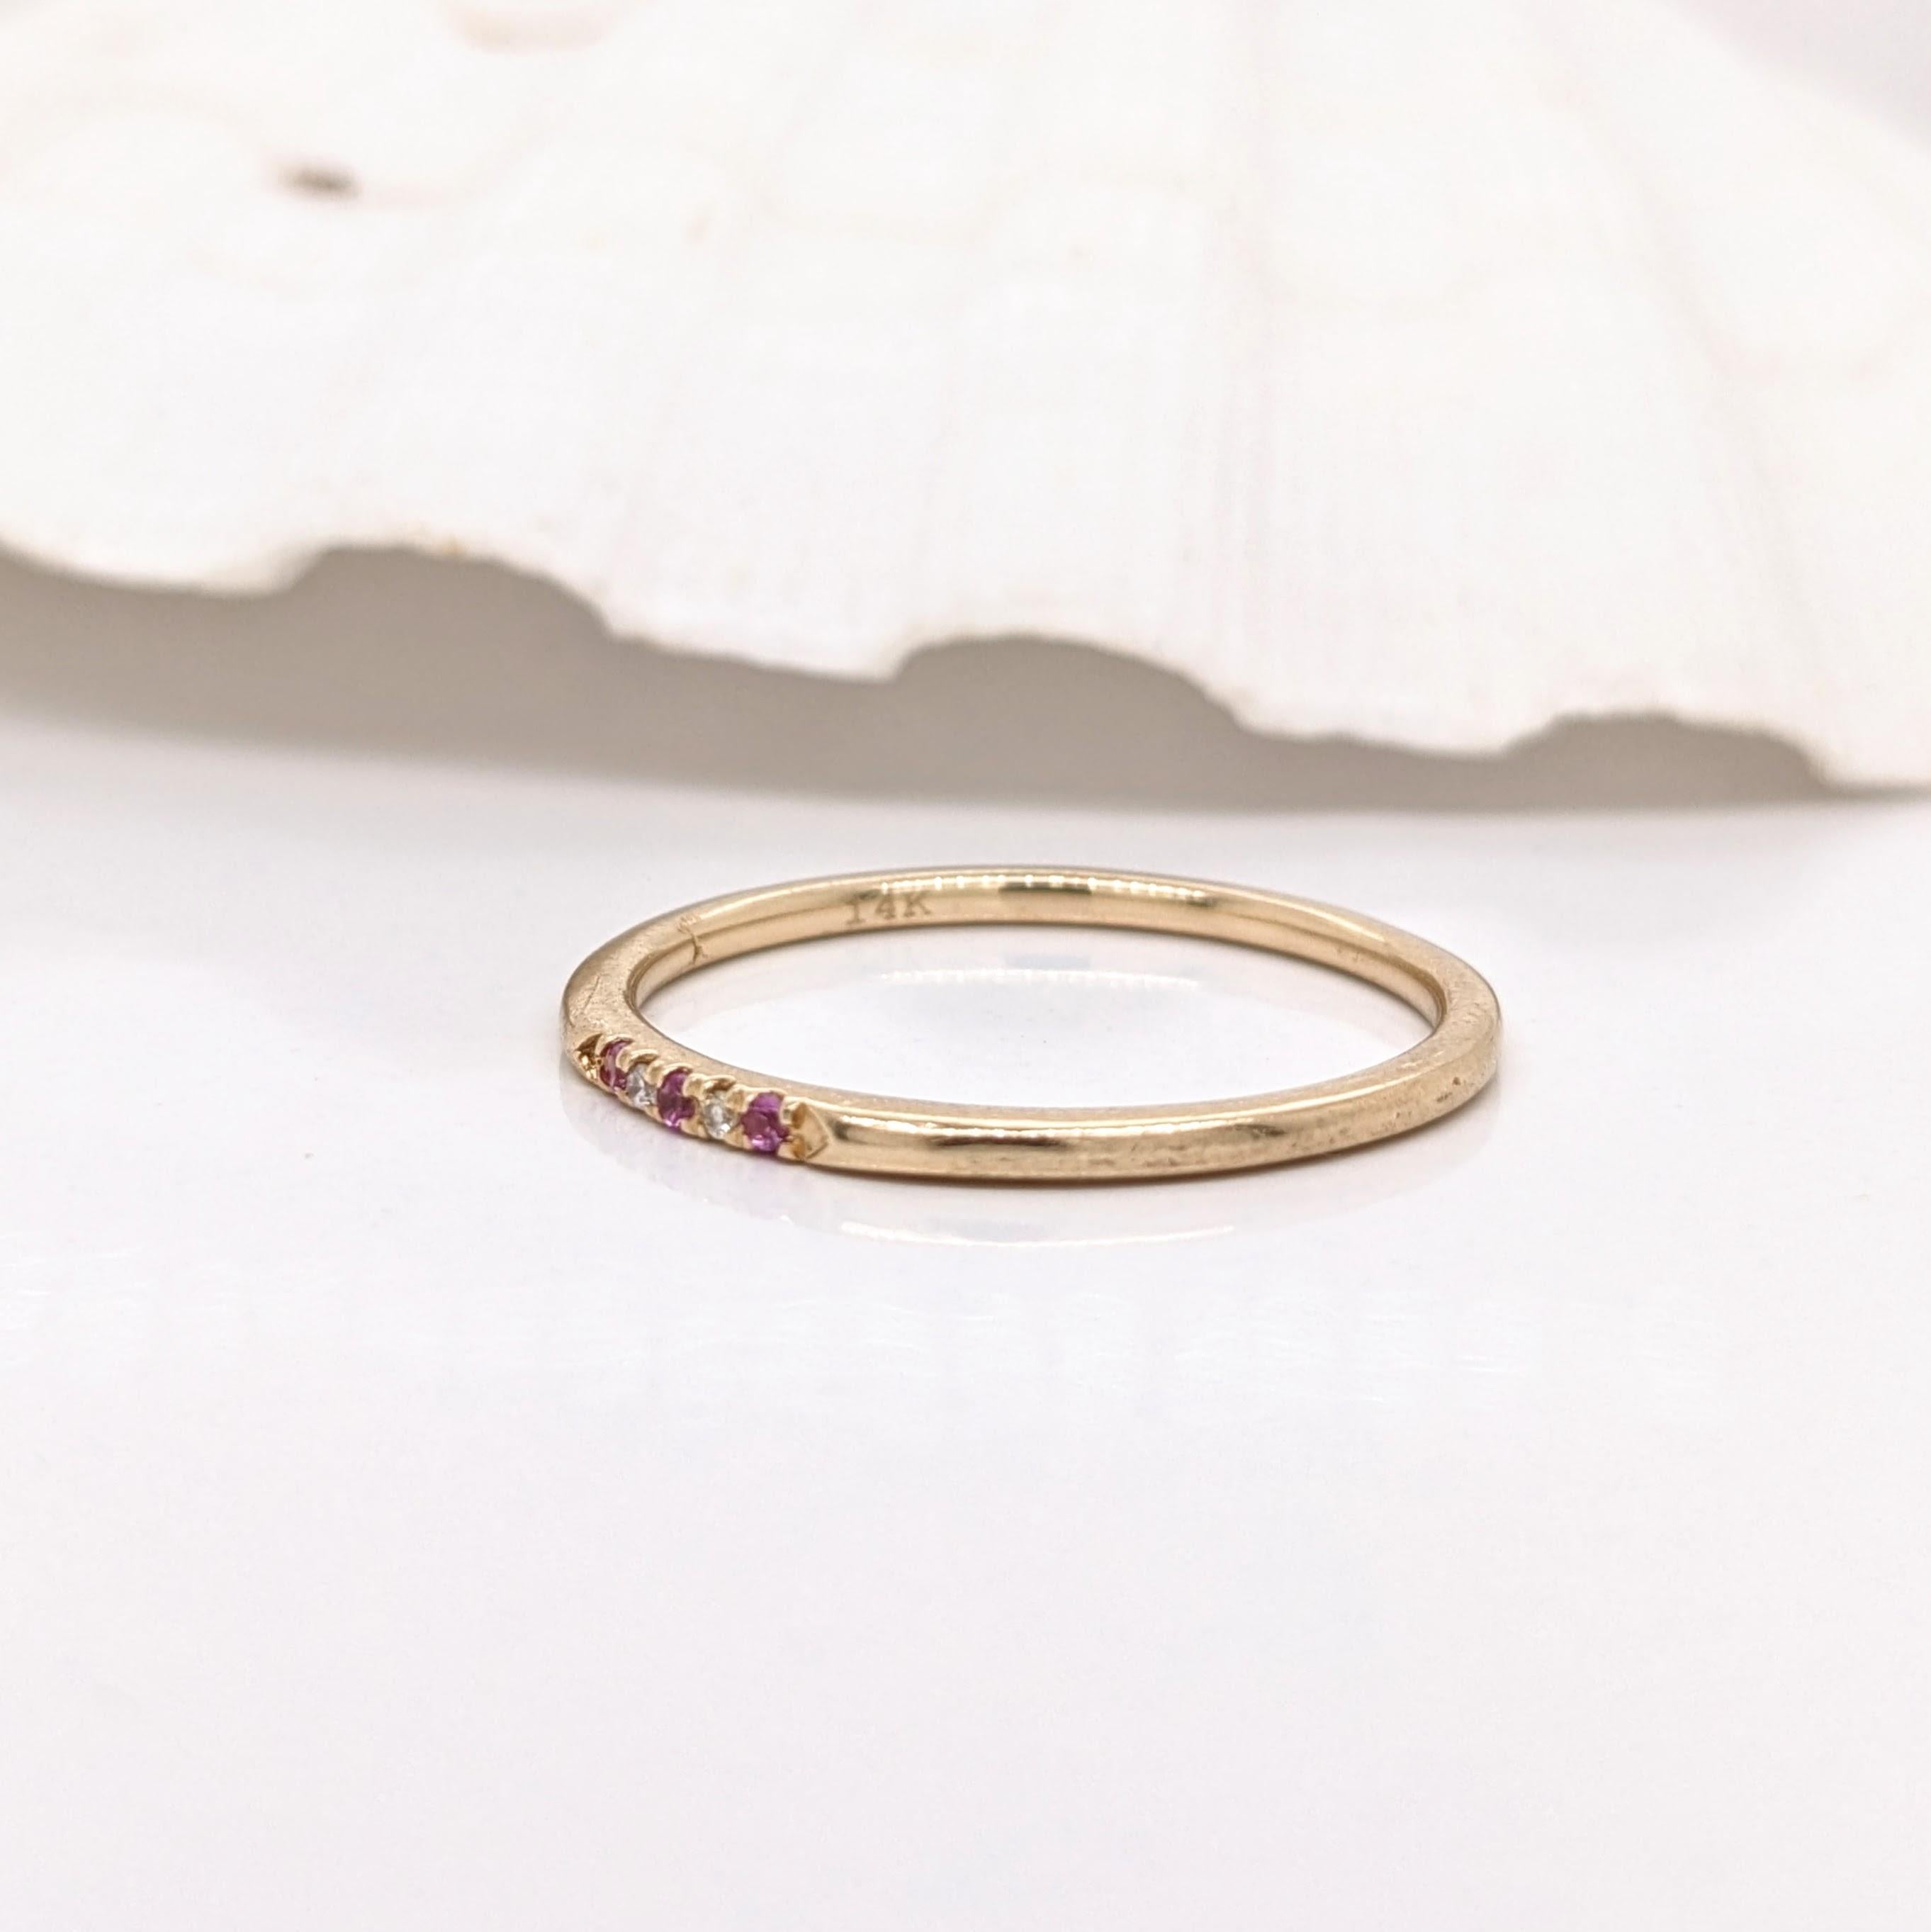 This beautiful sleek ring features three round pink sapphire gemstones with natural earth mined diamonds, all set in solid 14K gold. This ring can be a lovely September birthstone gift for your loved ones! 

Specifications

Item Type: Ring
Center